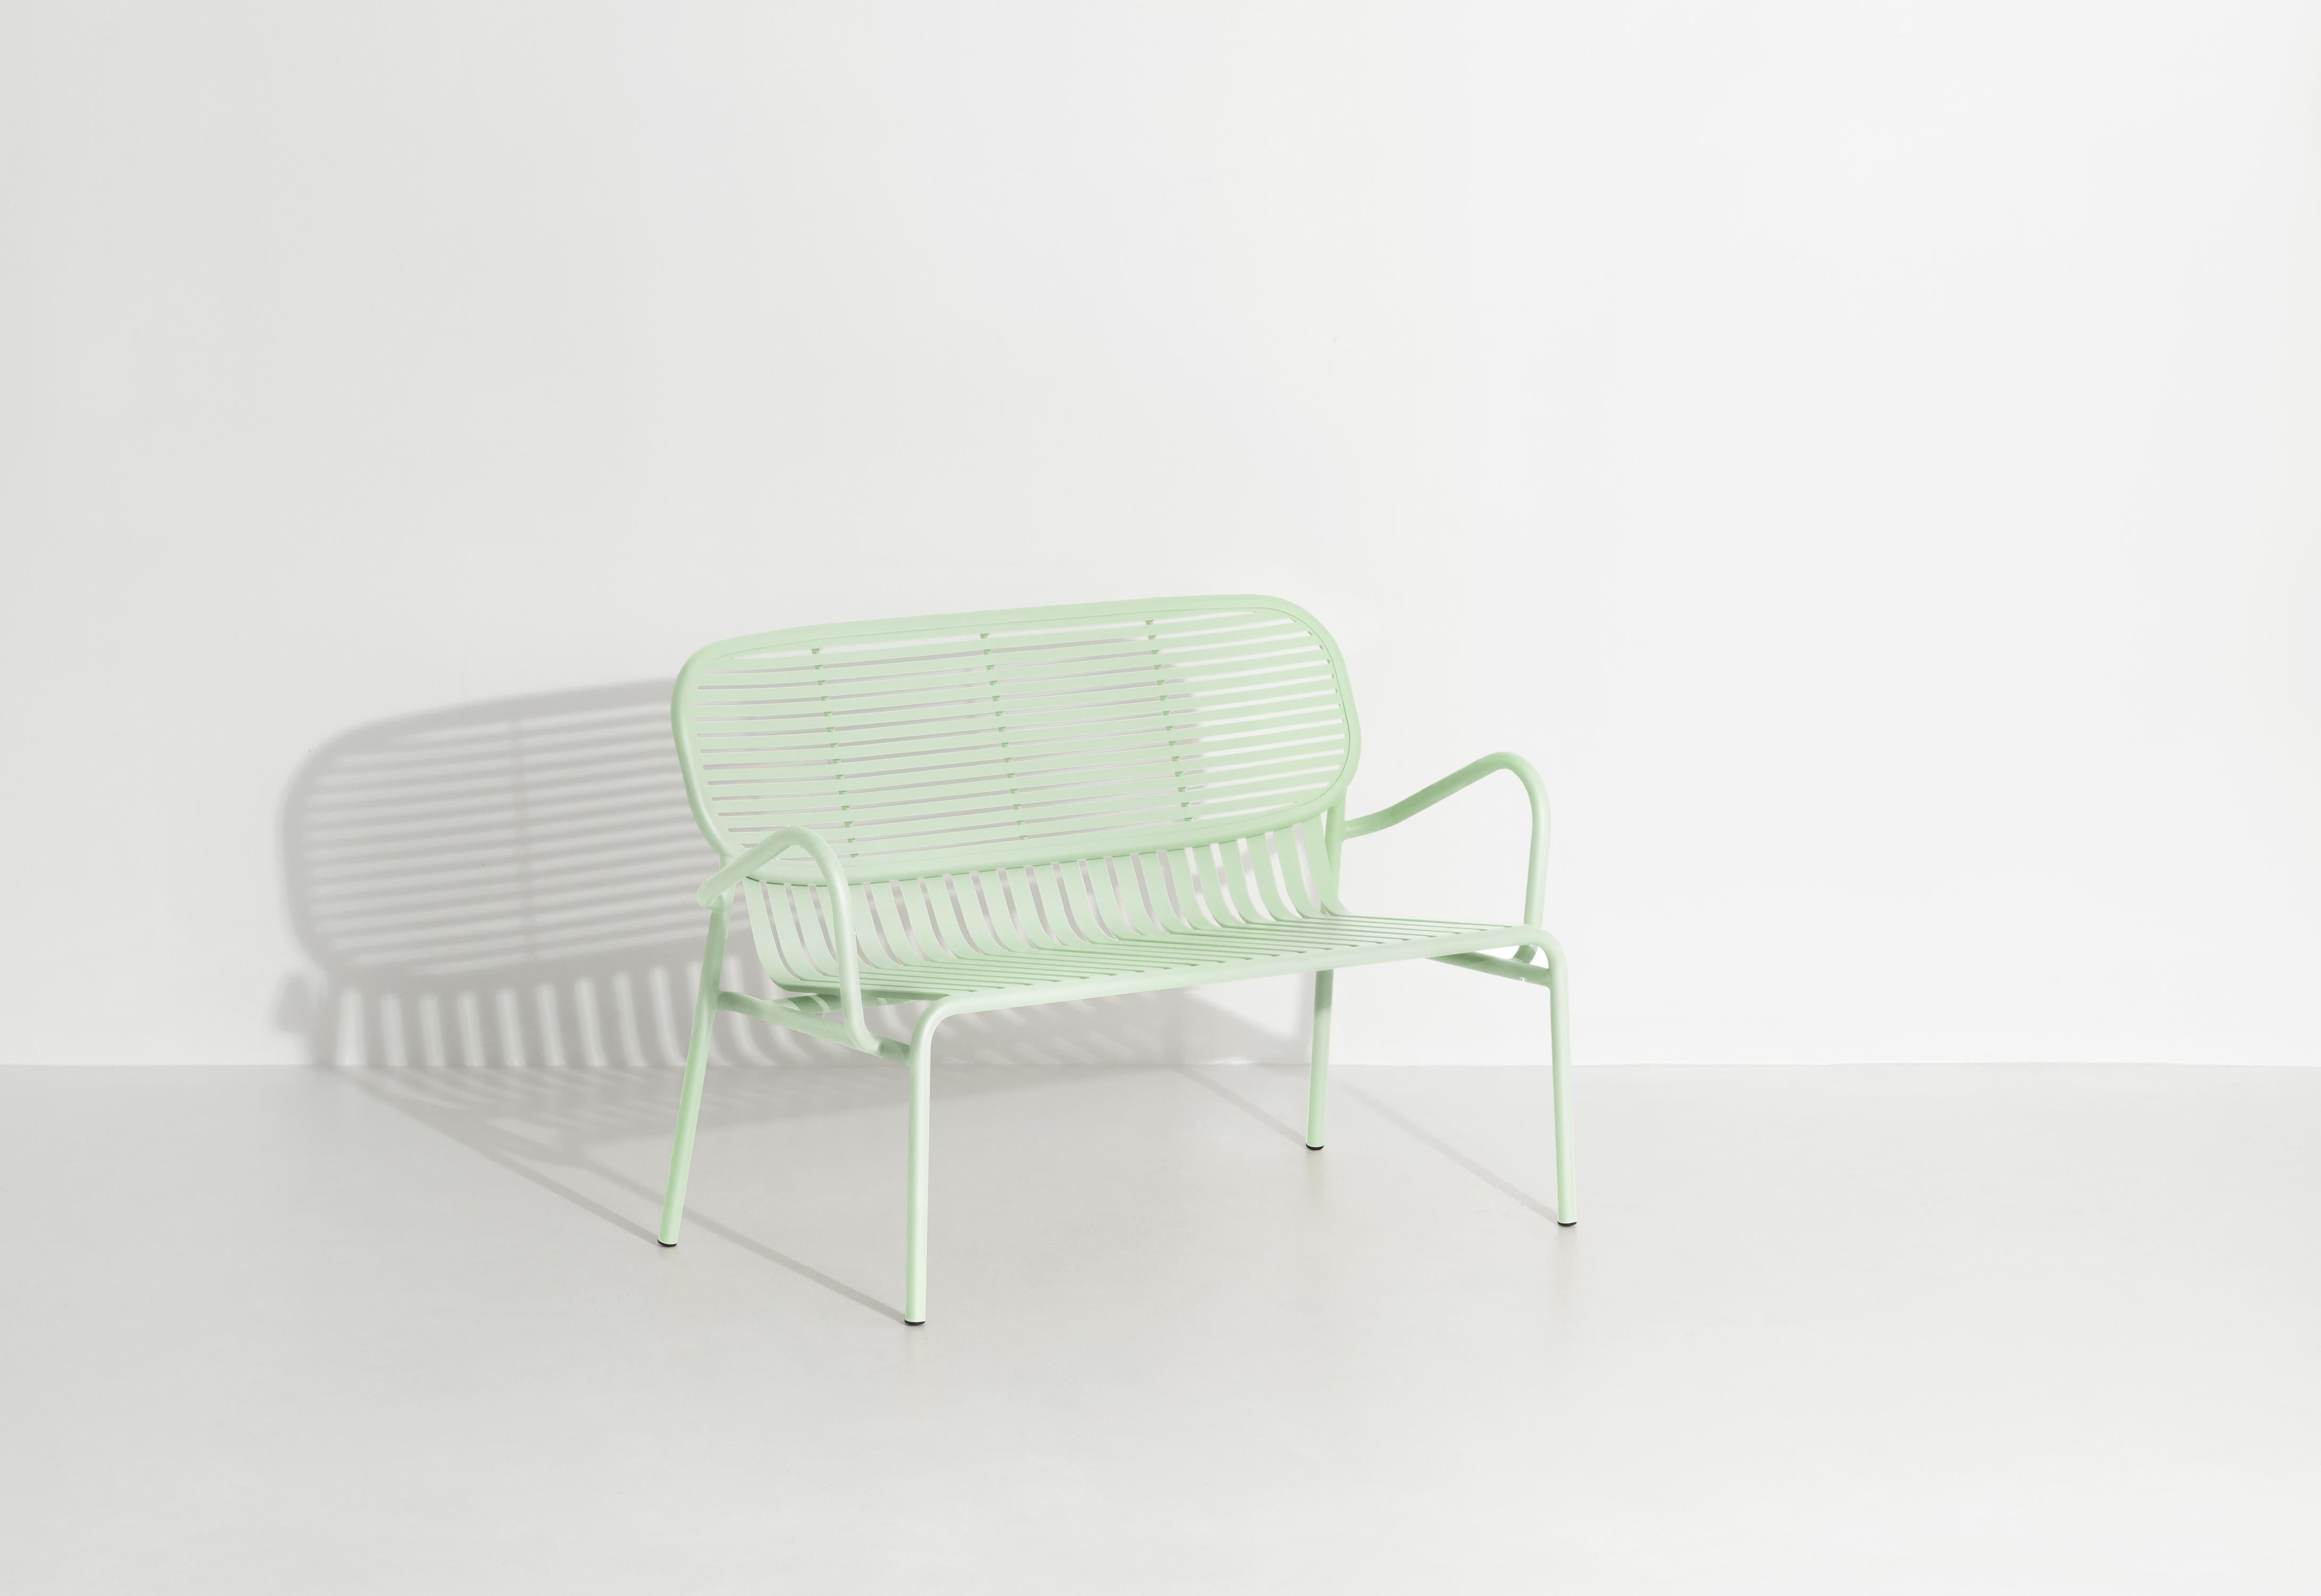 Petite Friture Week-End Sofa in Pastel Green Aluminium by Studio BrichetZiegler, 2017

The week-end collection is a full range of outdoor furniture, in aluminium grained epoxy paint, matt finish, that includes 18 functions and 8 colours for the